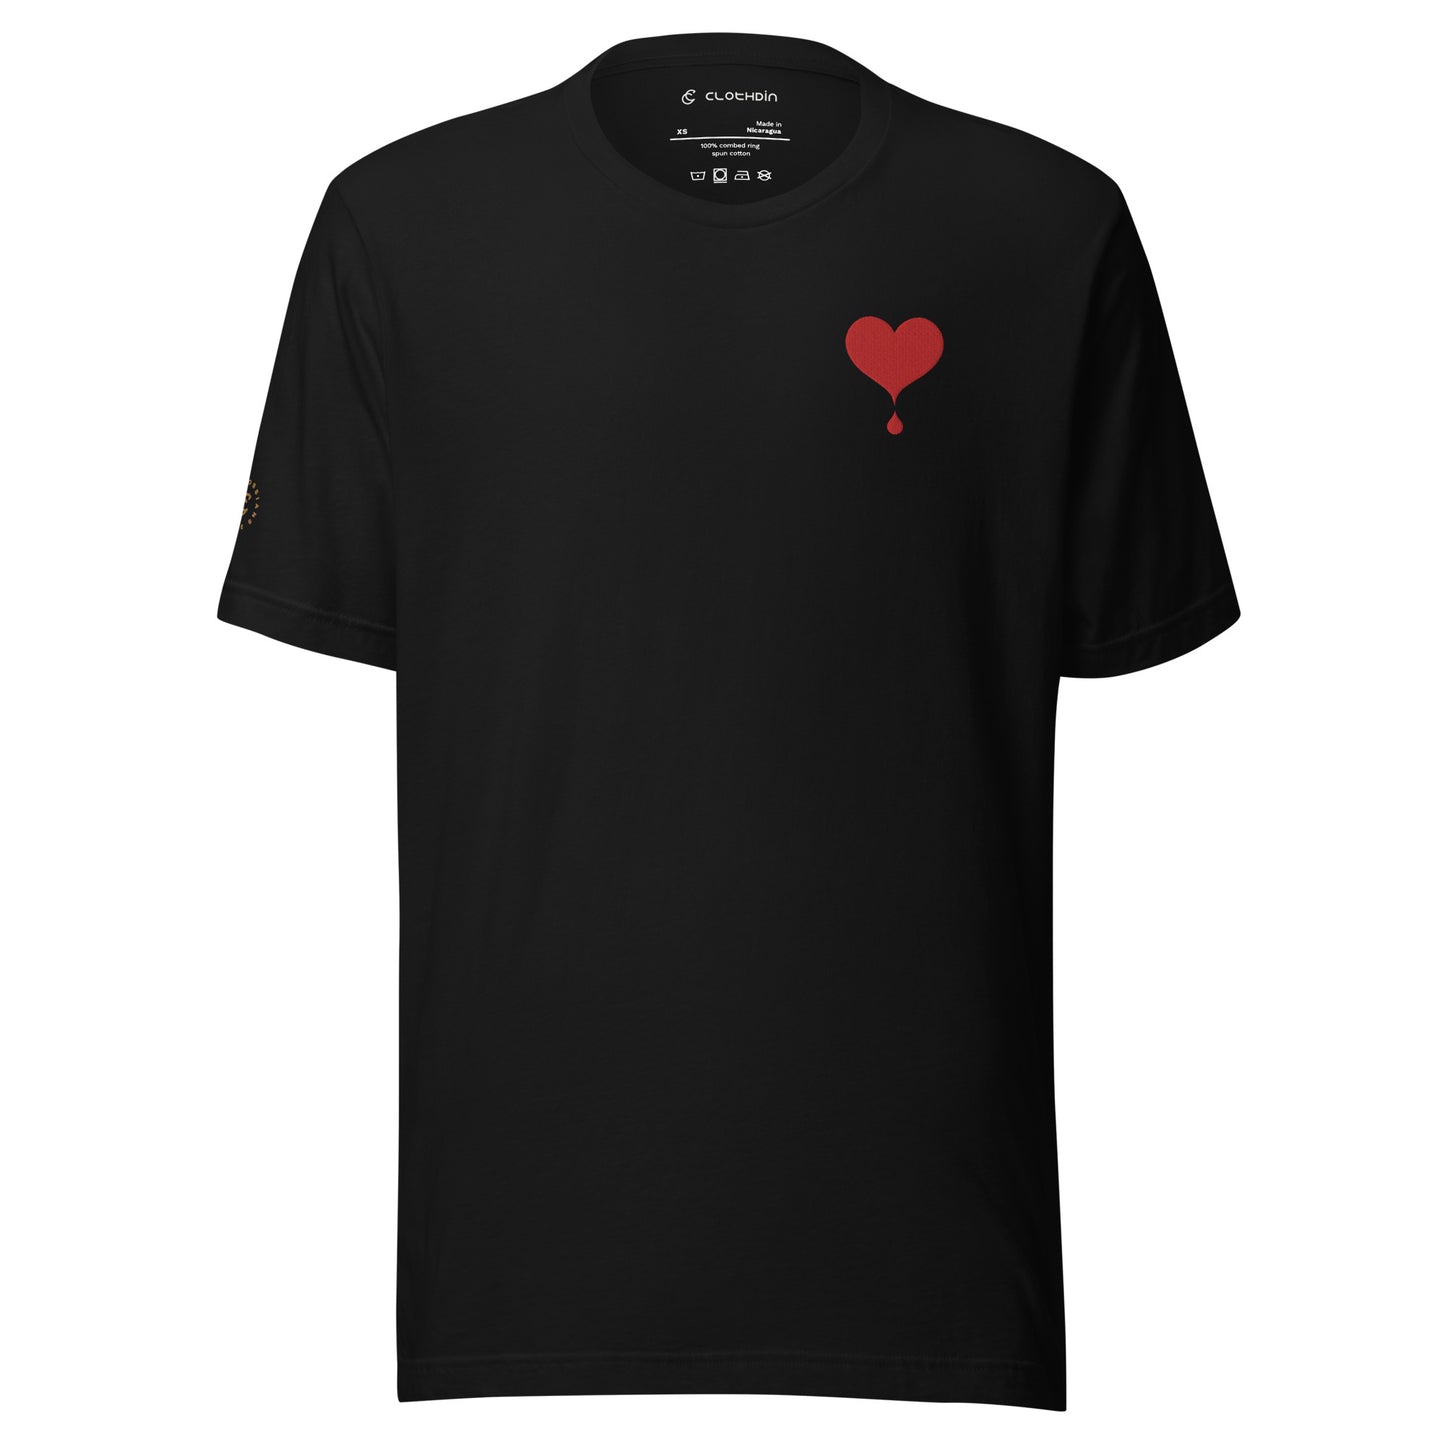 Blood Shed in Love t-shirt